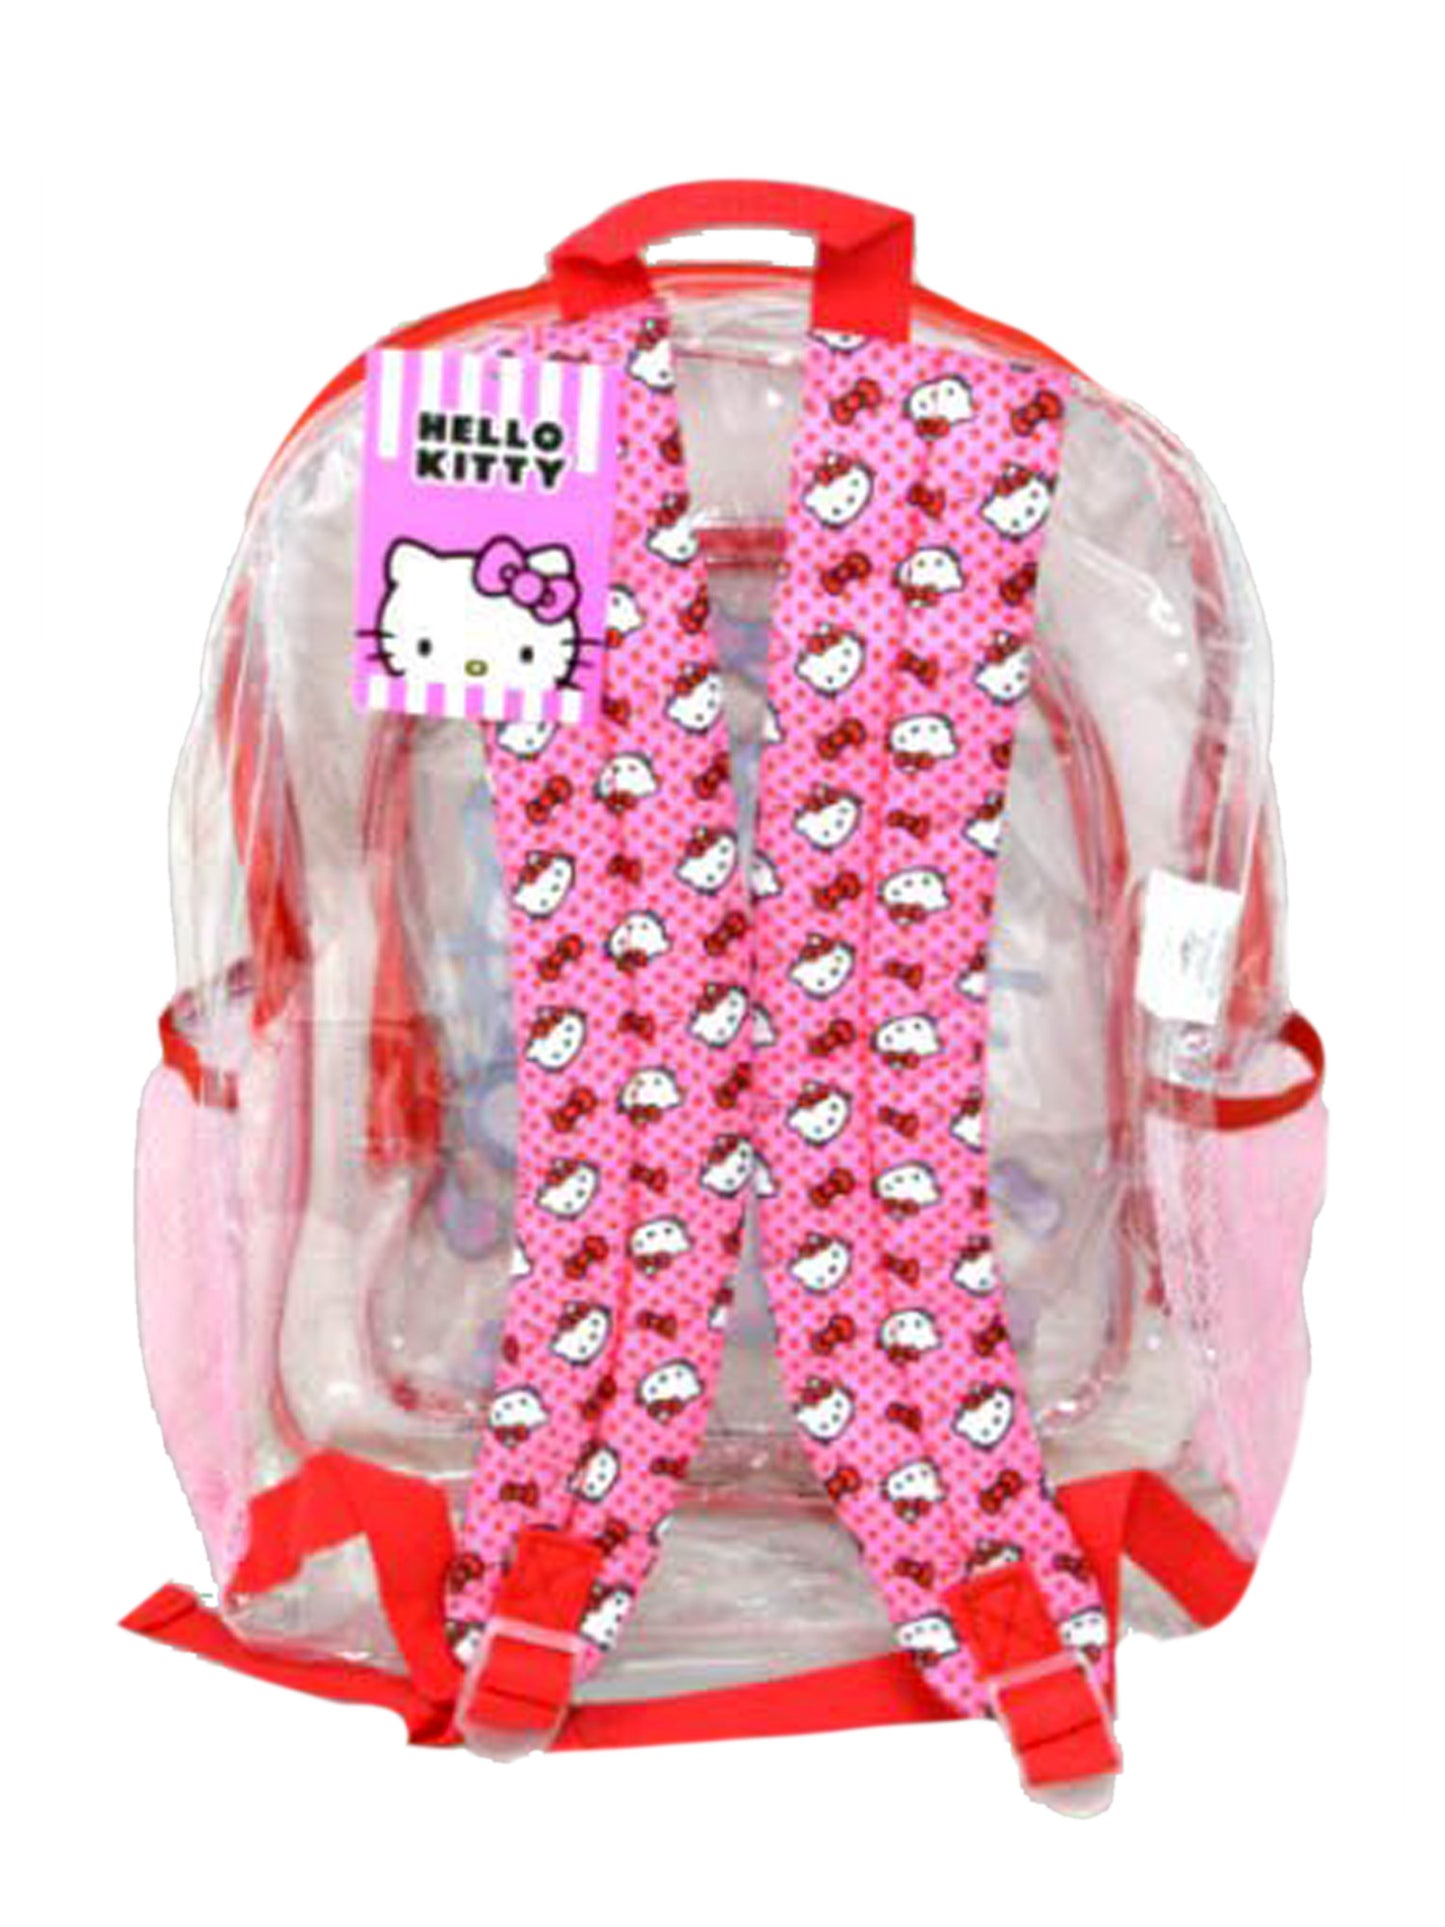 Hello Kitty Transparent Backpack 16" w/ Toothbrush & Brush Cover Travel Set